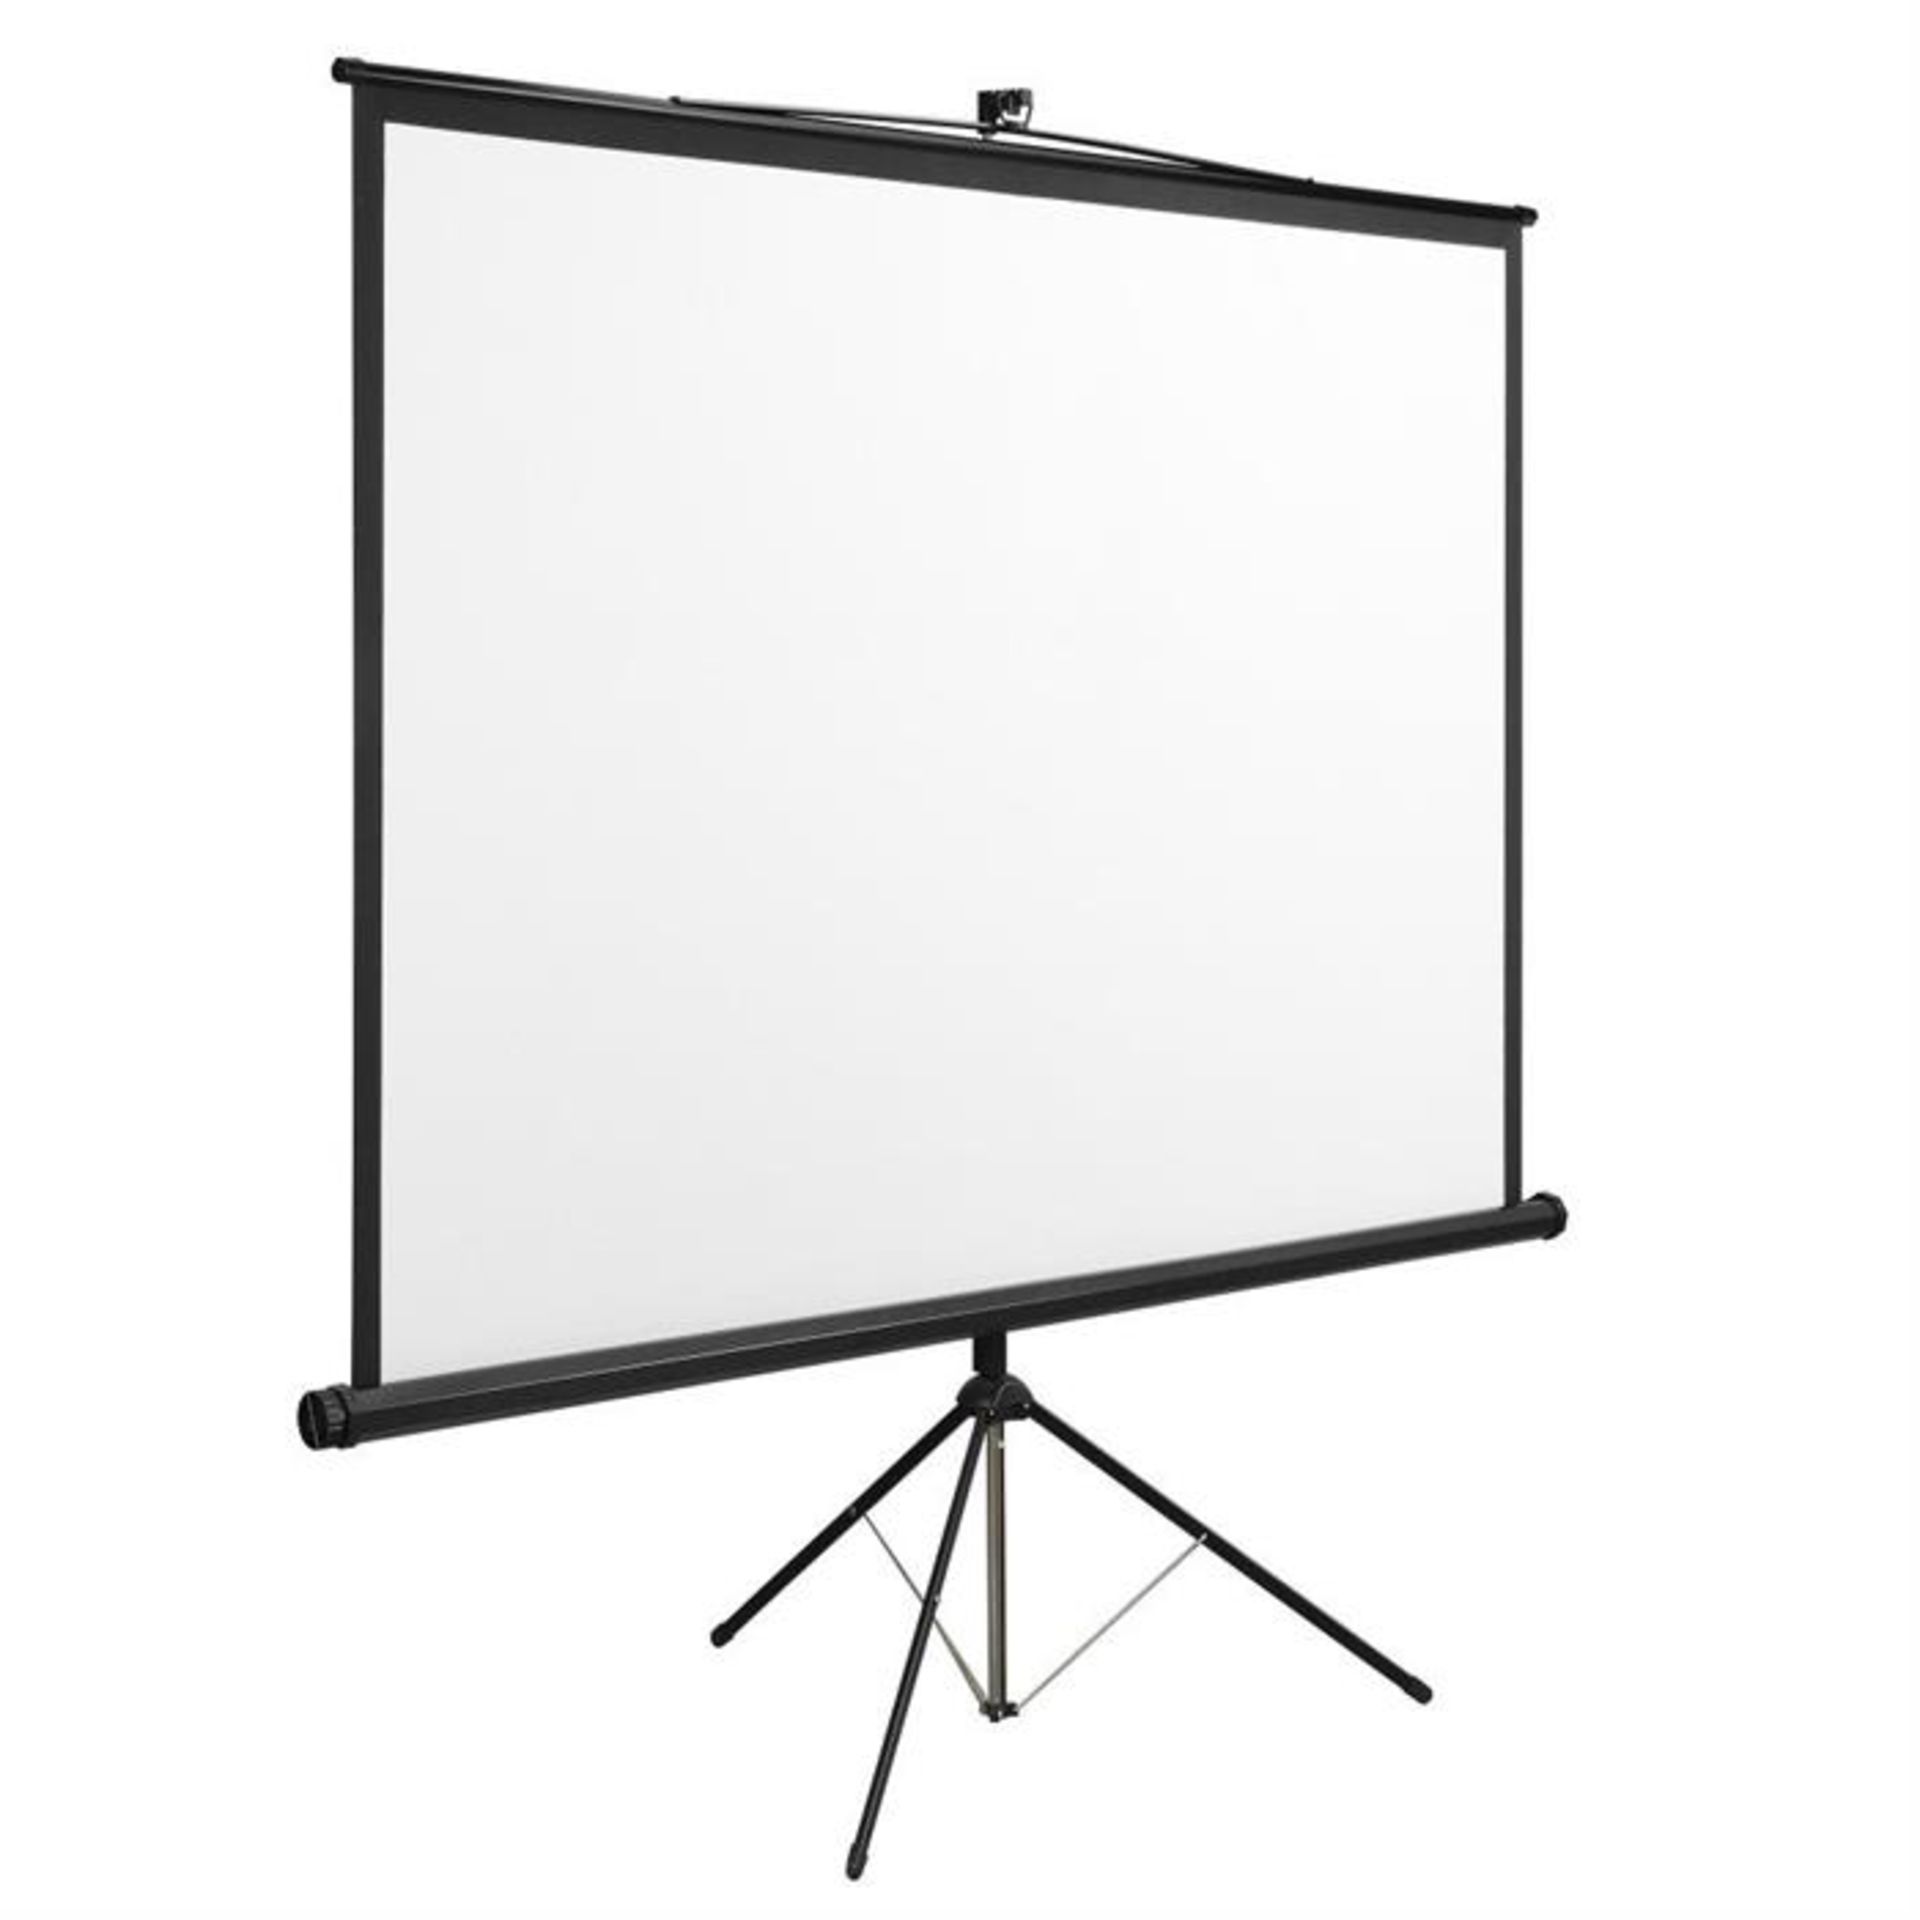 86" Tri-pod projector screen (4-3). Boxed. Please note by Bidding on this item you agree to the